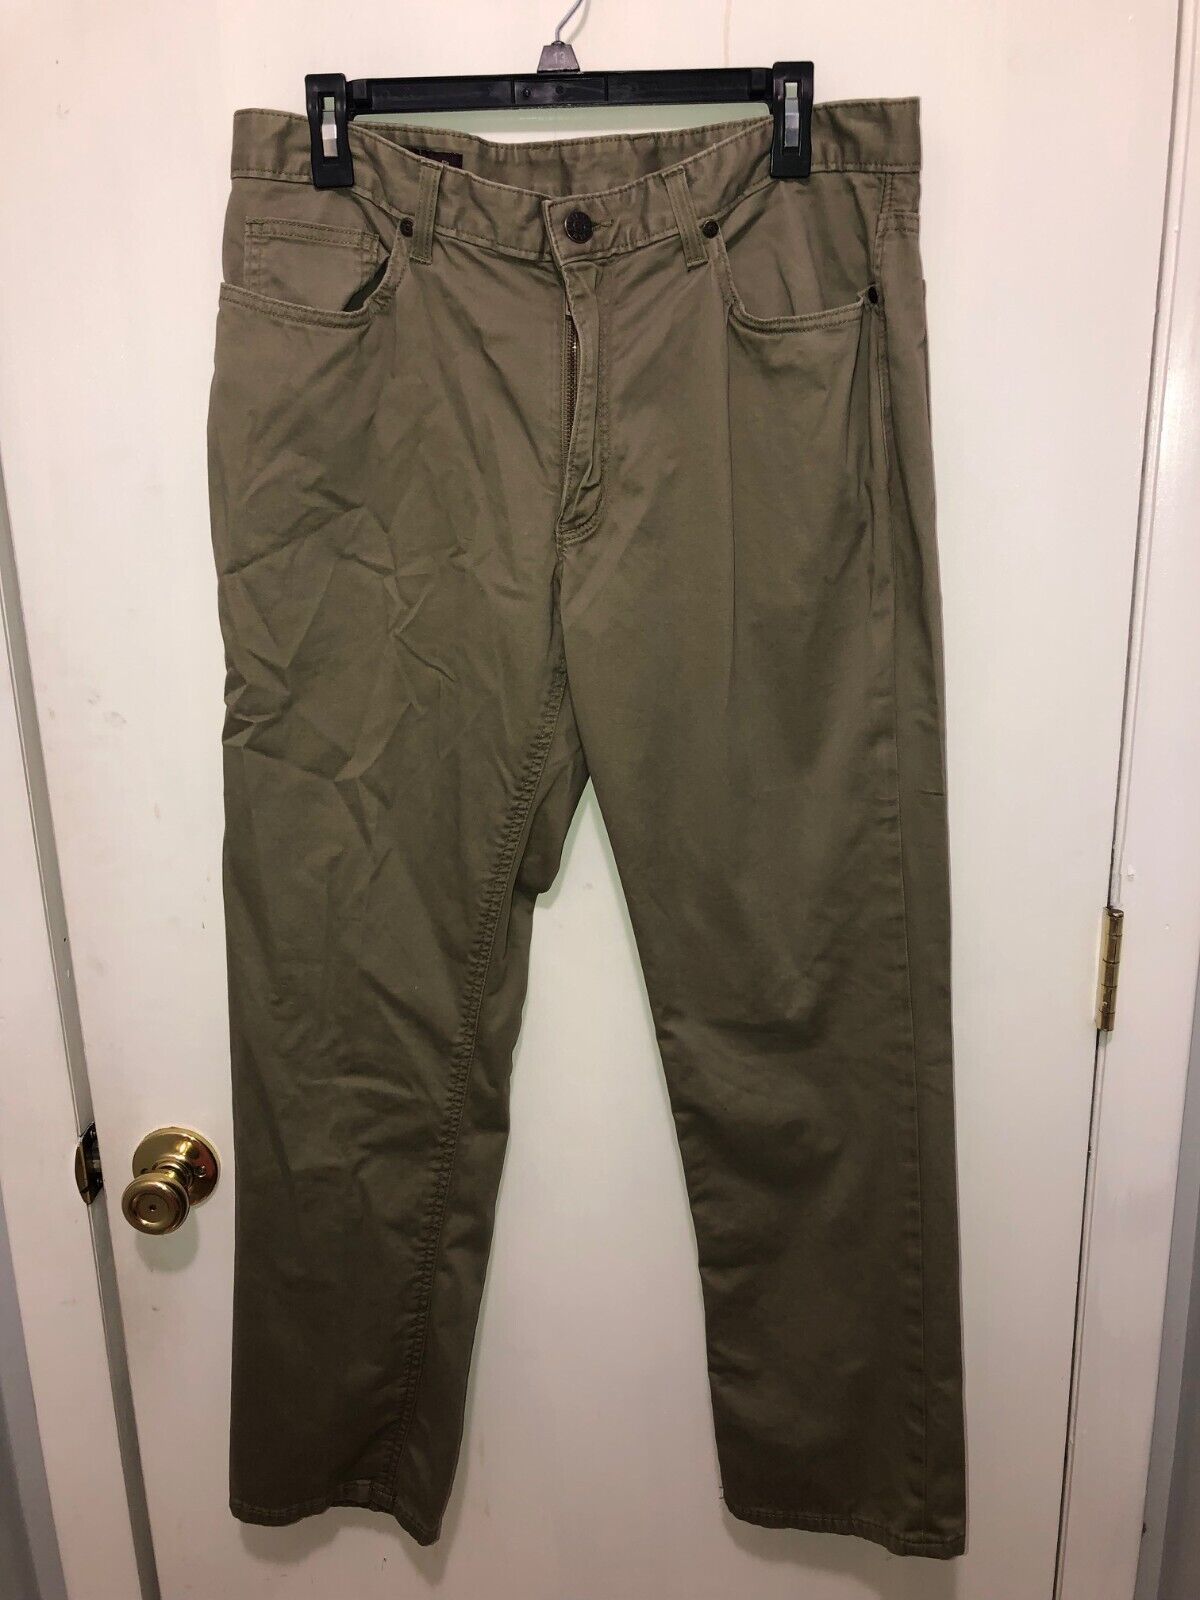 Johnston & Murphy Slim Fit Chino Pants Size 34X30 Actual Inseam is 29" - $12.86